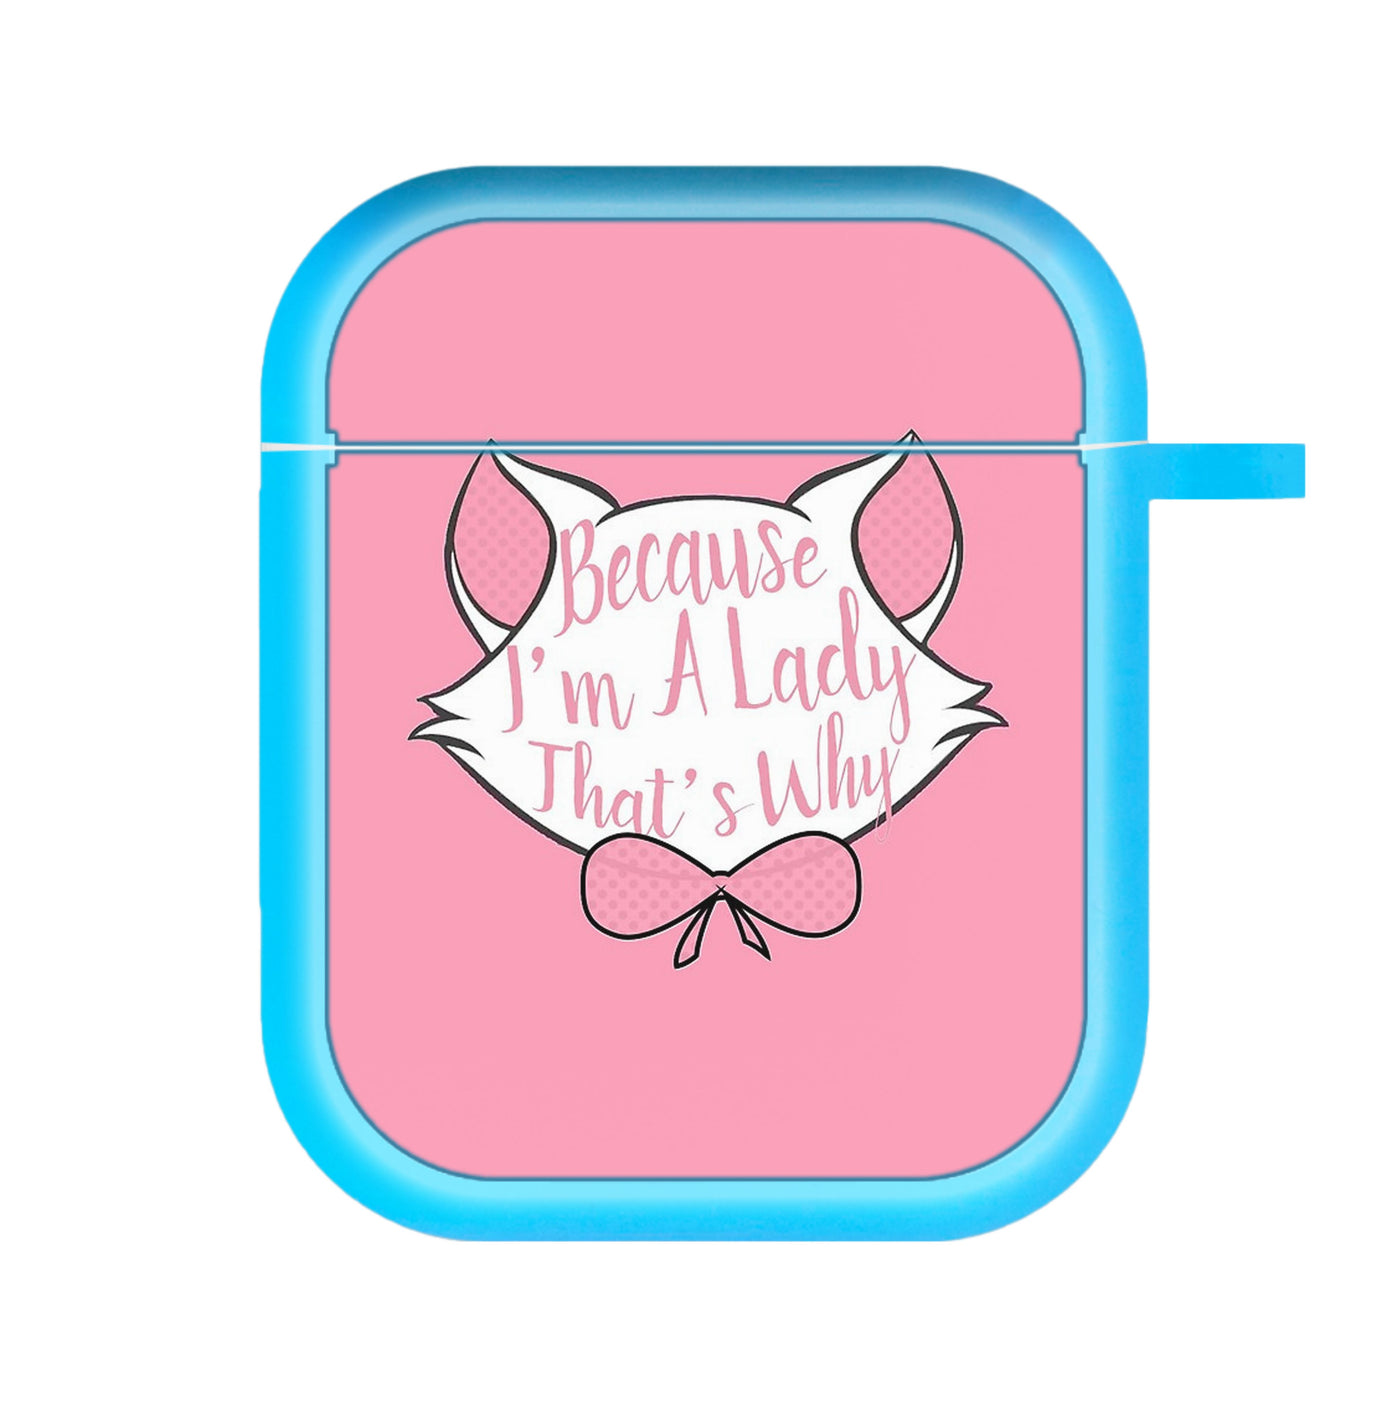 Because I'm A Lady That's Why - Disney AirPods Case